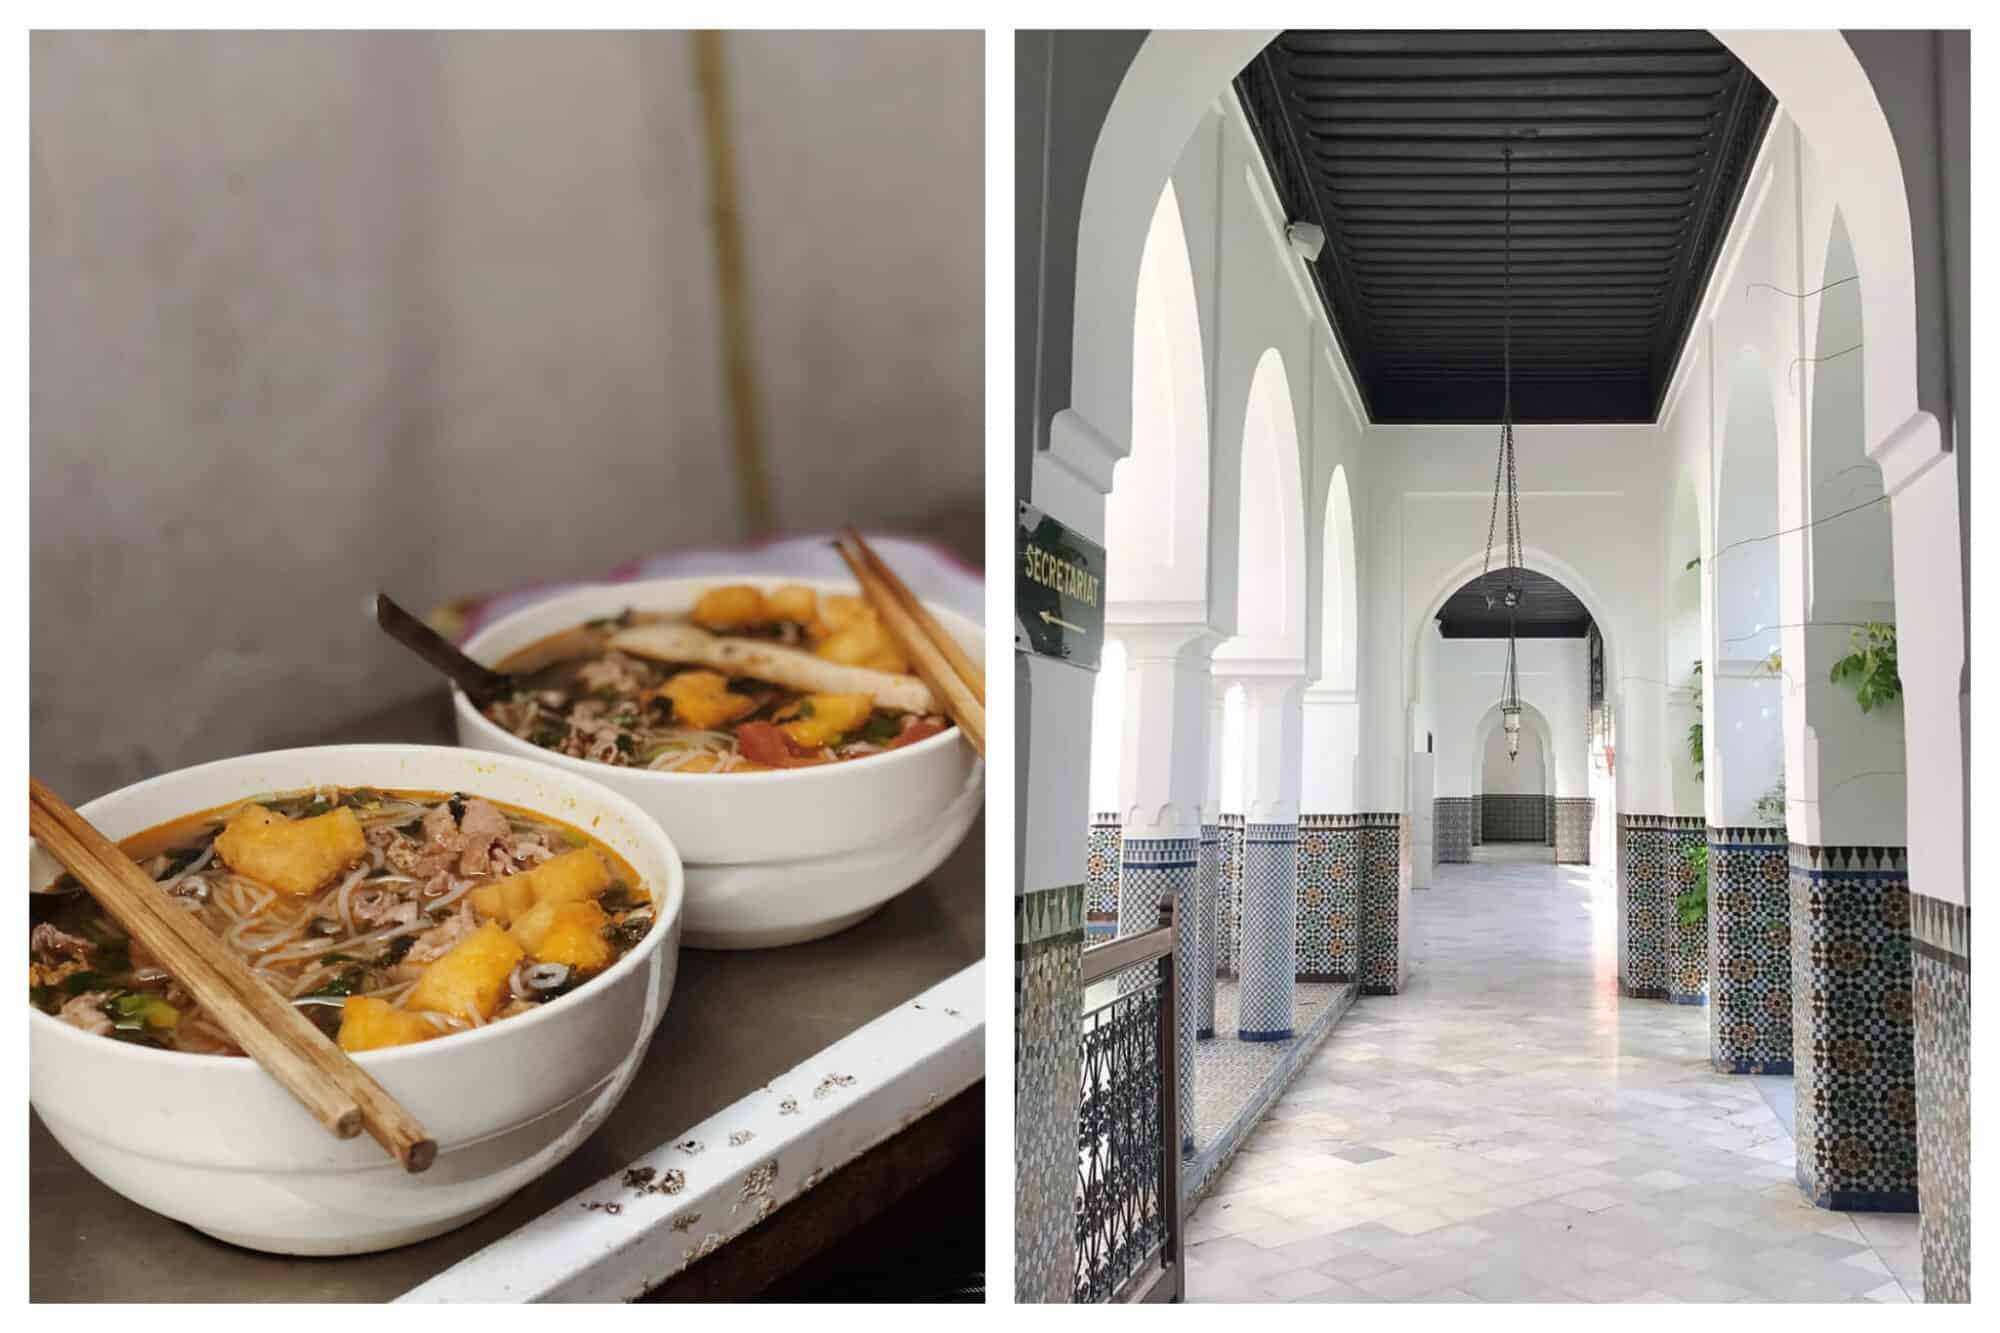 Left: Twopairs of chopsticks and two bowls of pho sit on a countertop in Paris 13th arrondissement, Right: The beautiful hallway, bright, white, and tiled, of the Grande Mosquée in Paris